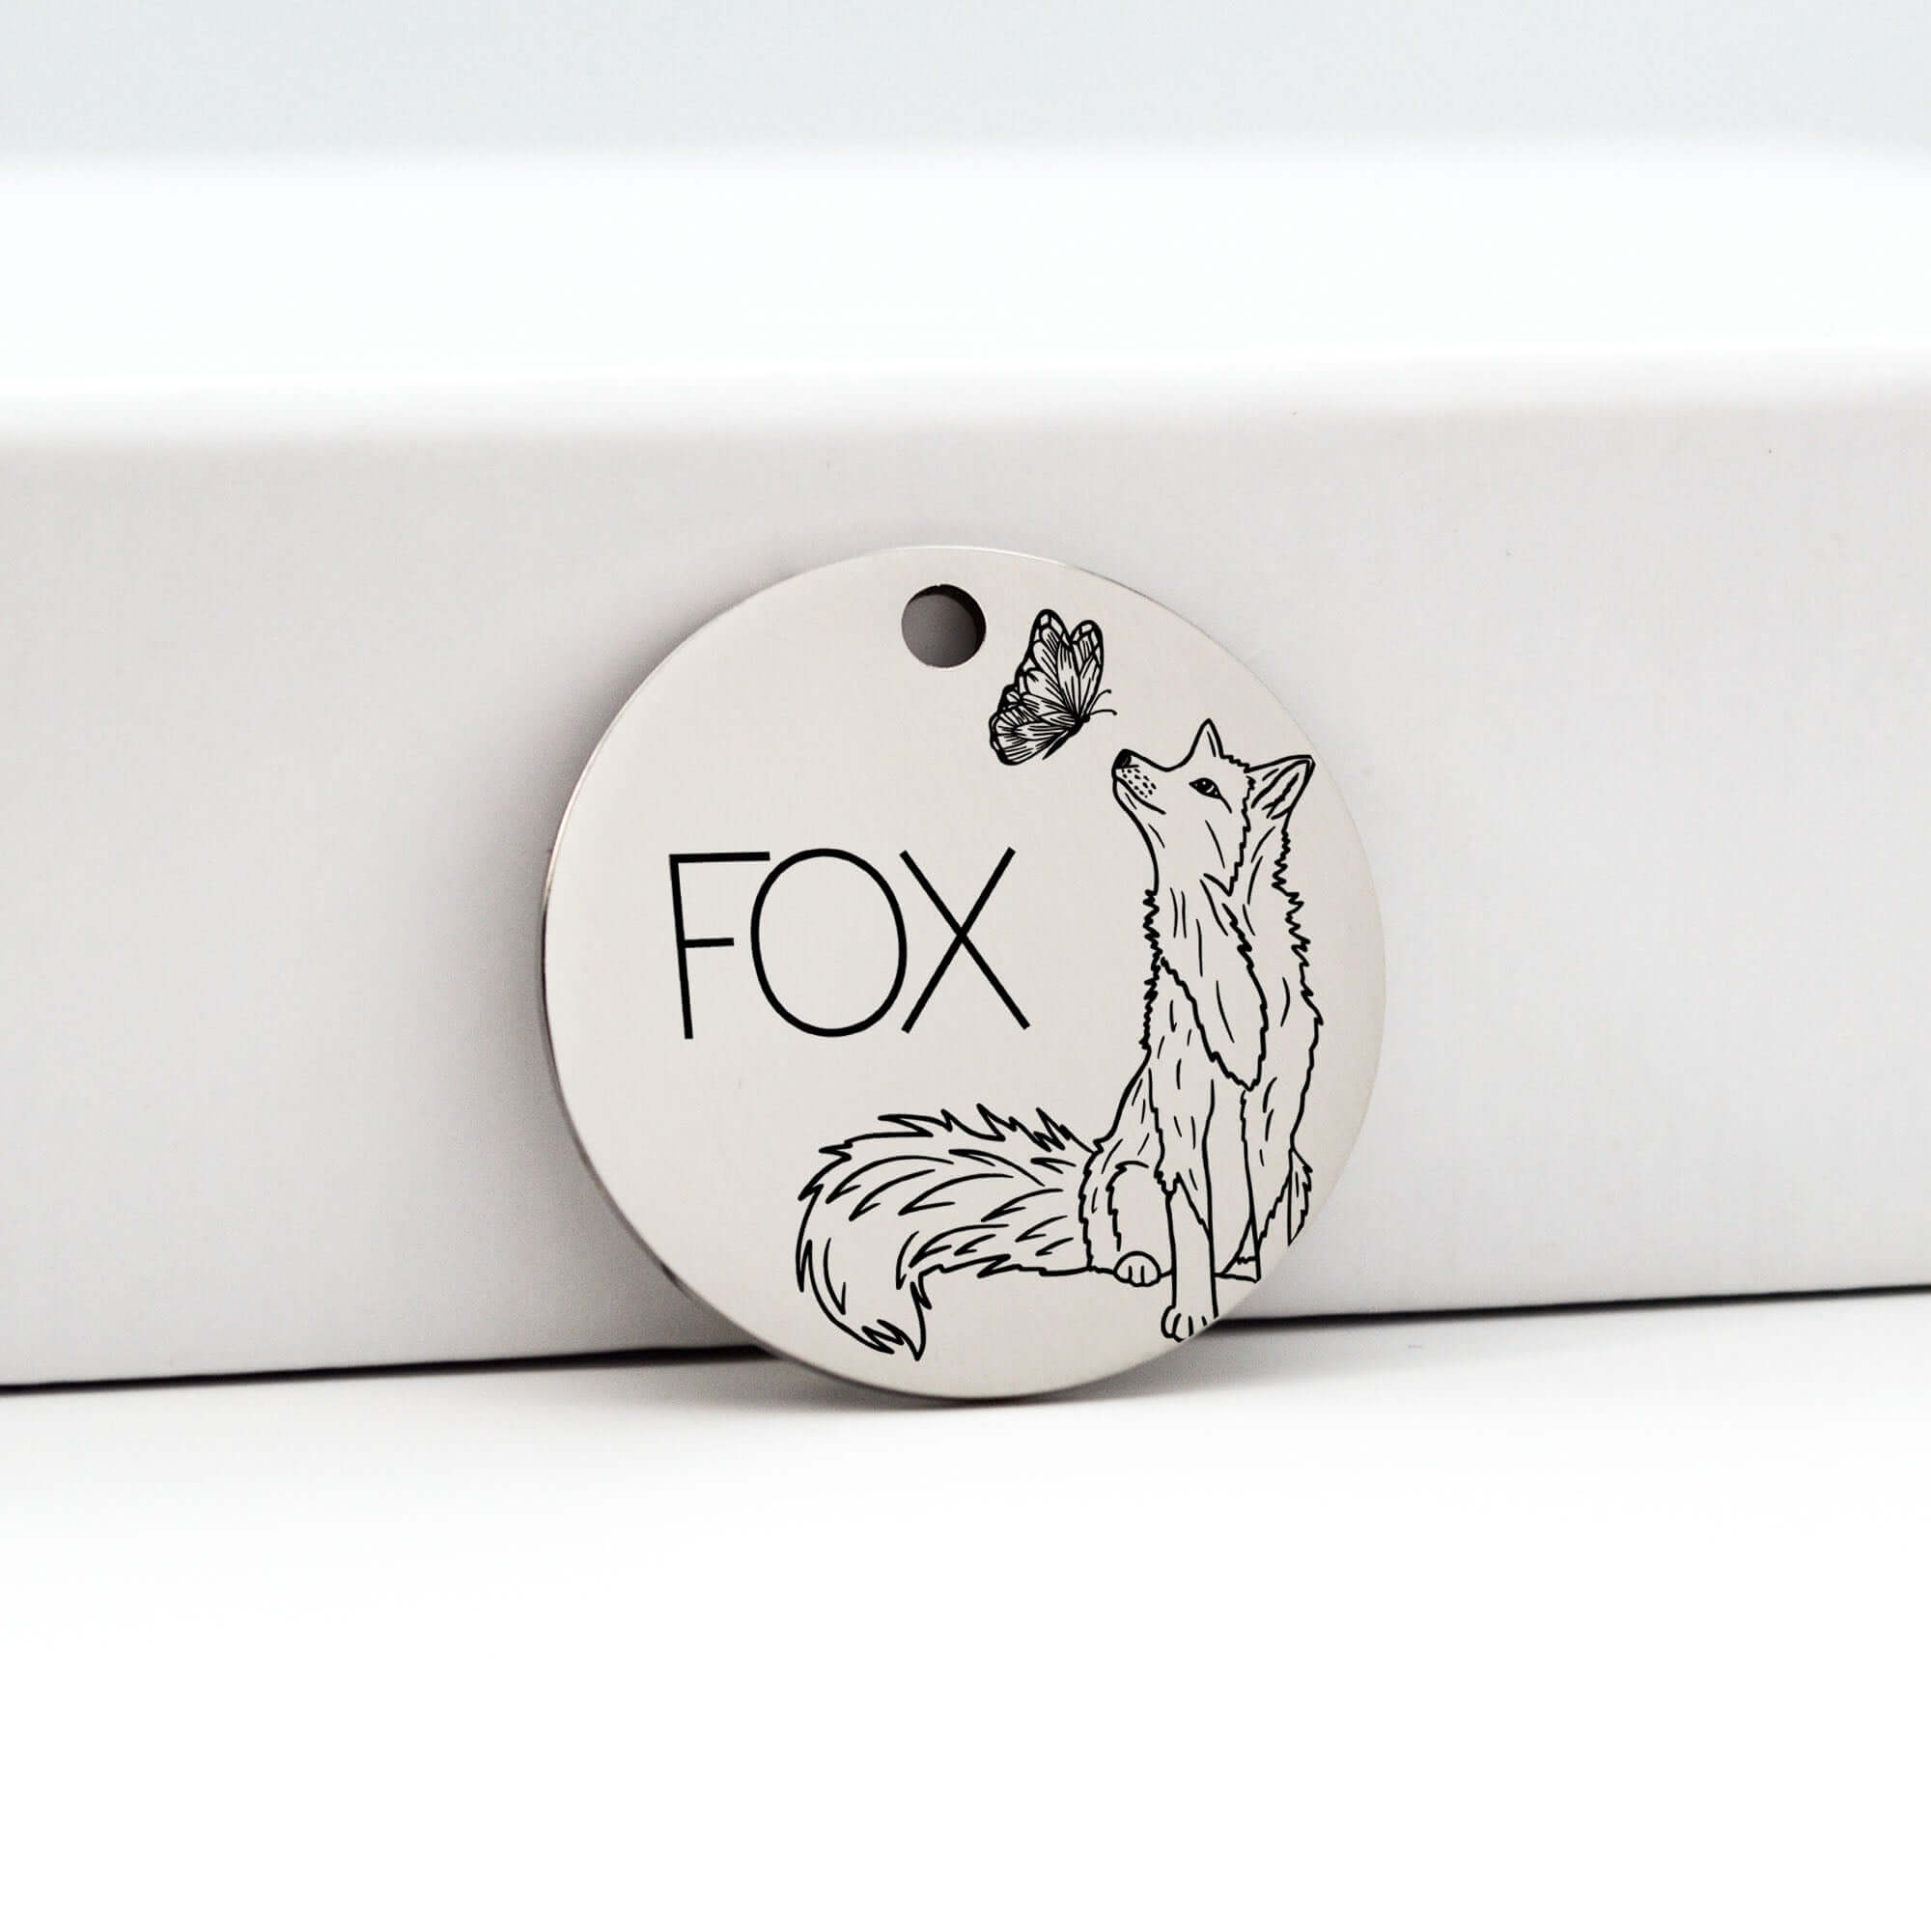 Stainless Steel Tags for Pets Fox Design in Silver | Tag4MyPet